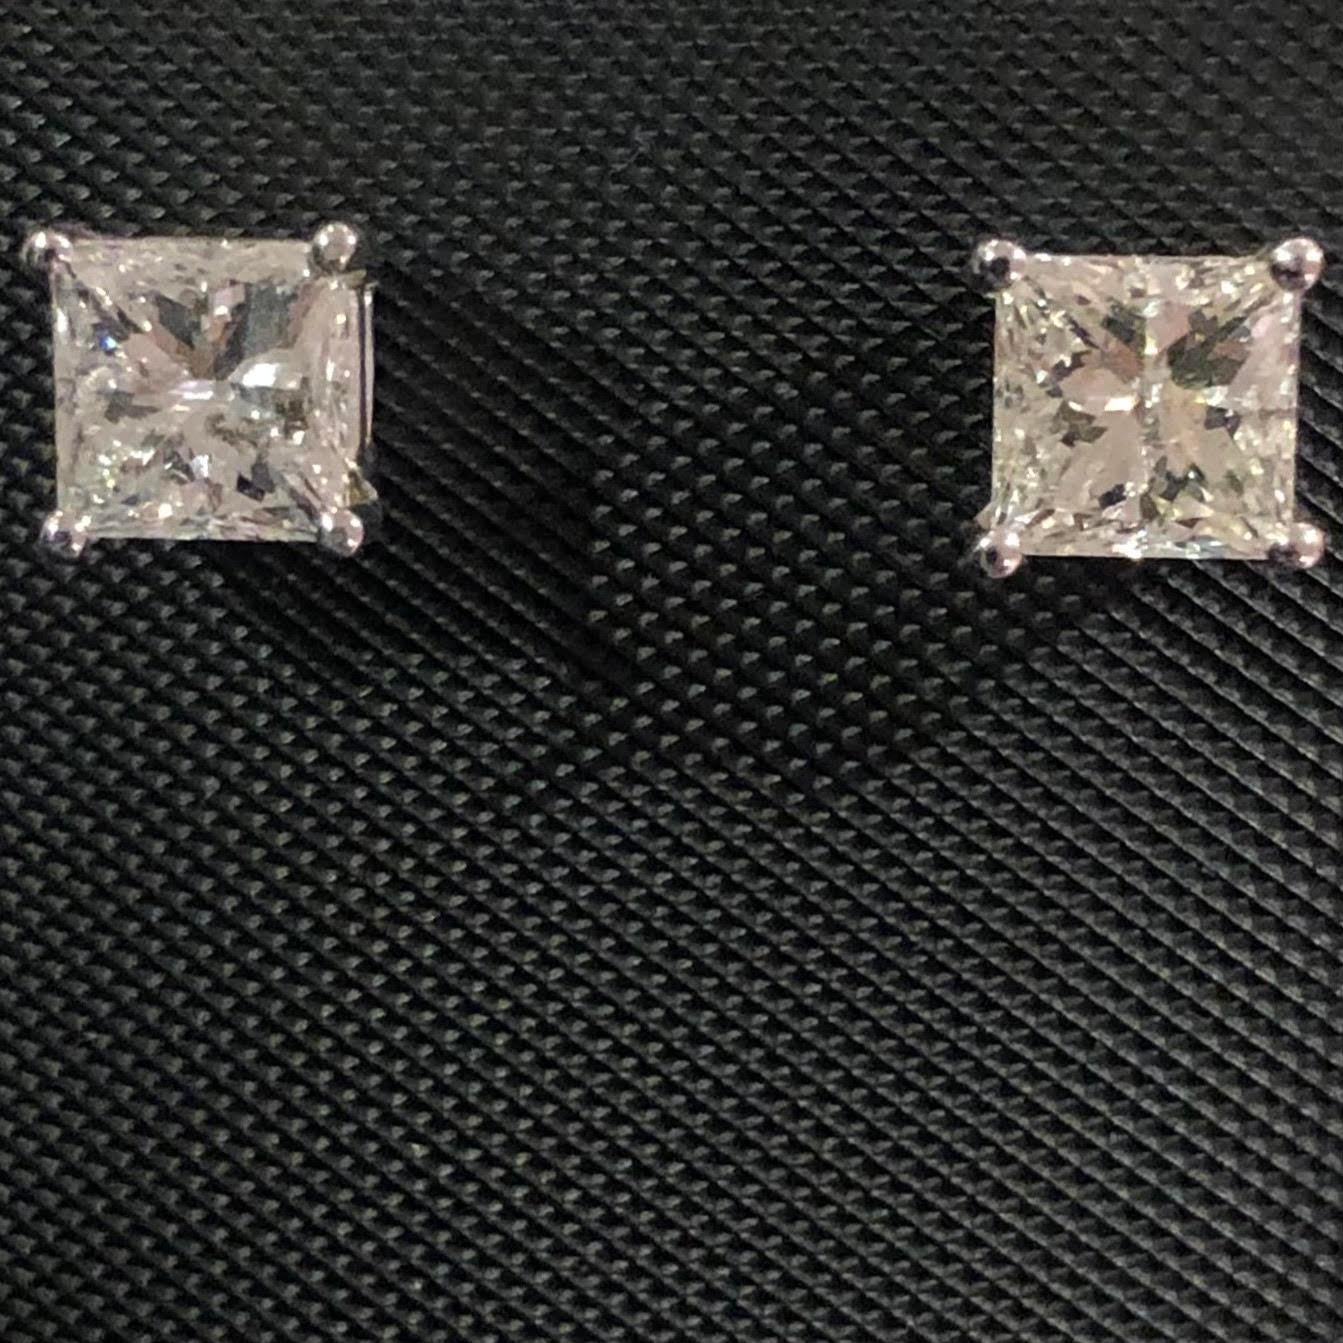 Stunning 1 3/5 Ct Princess Cut Solitaire Diamond Stud Earrings in 14K White Gold. These natural diamond solitaire studs are certified with an appraisal report value.

A large center solitaire diamond (size of an engagement ring) is set on each ear